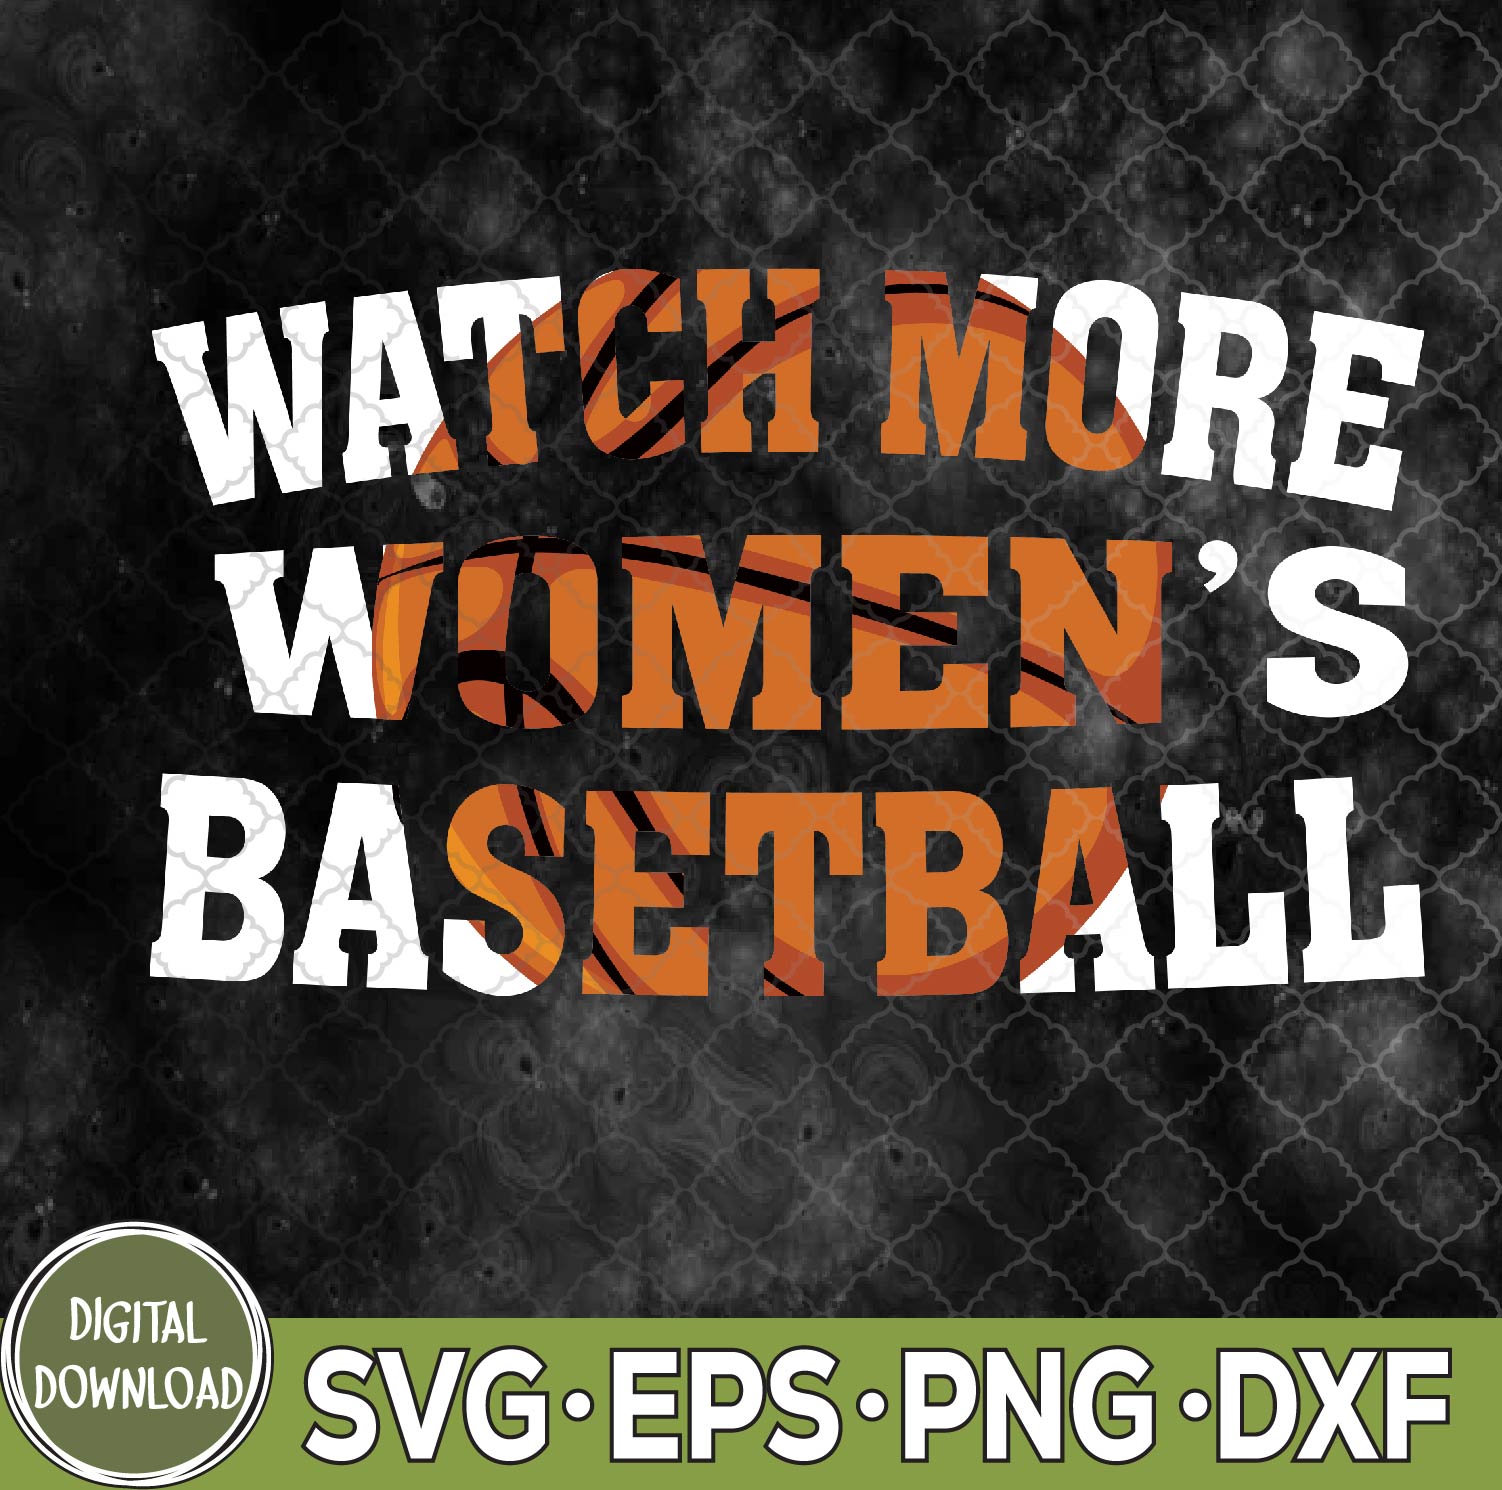 WTMNEW9file 09 226 Watch More Women's Basketball Funny Basketball Svg, Png, Digital Download